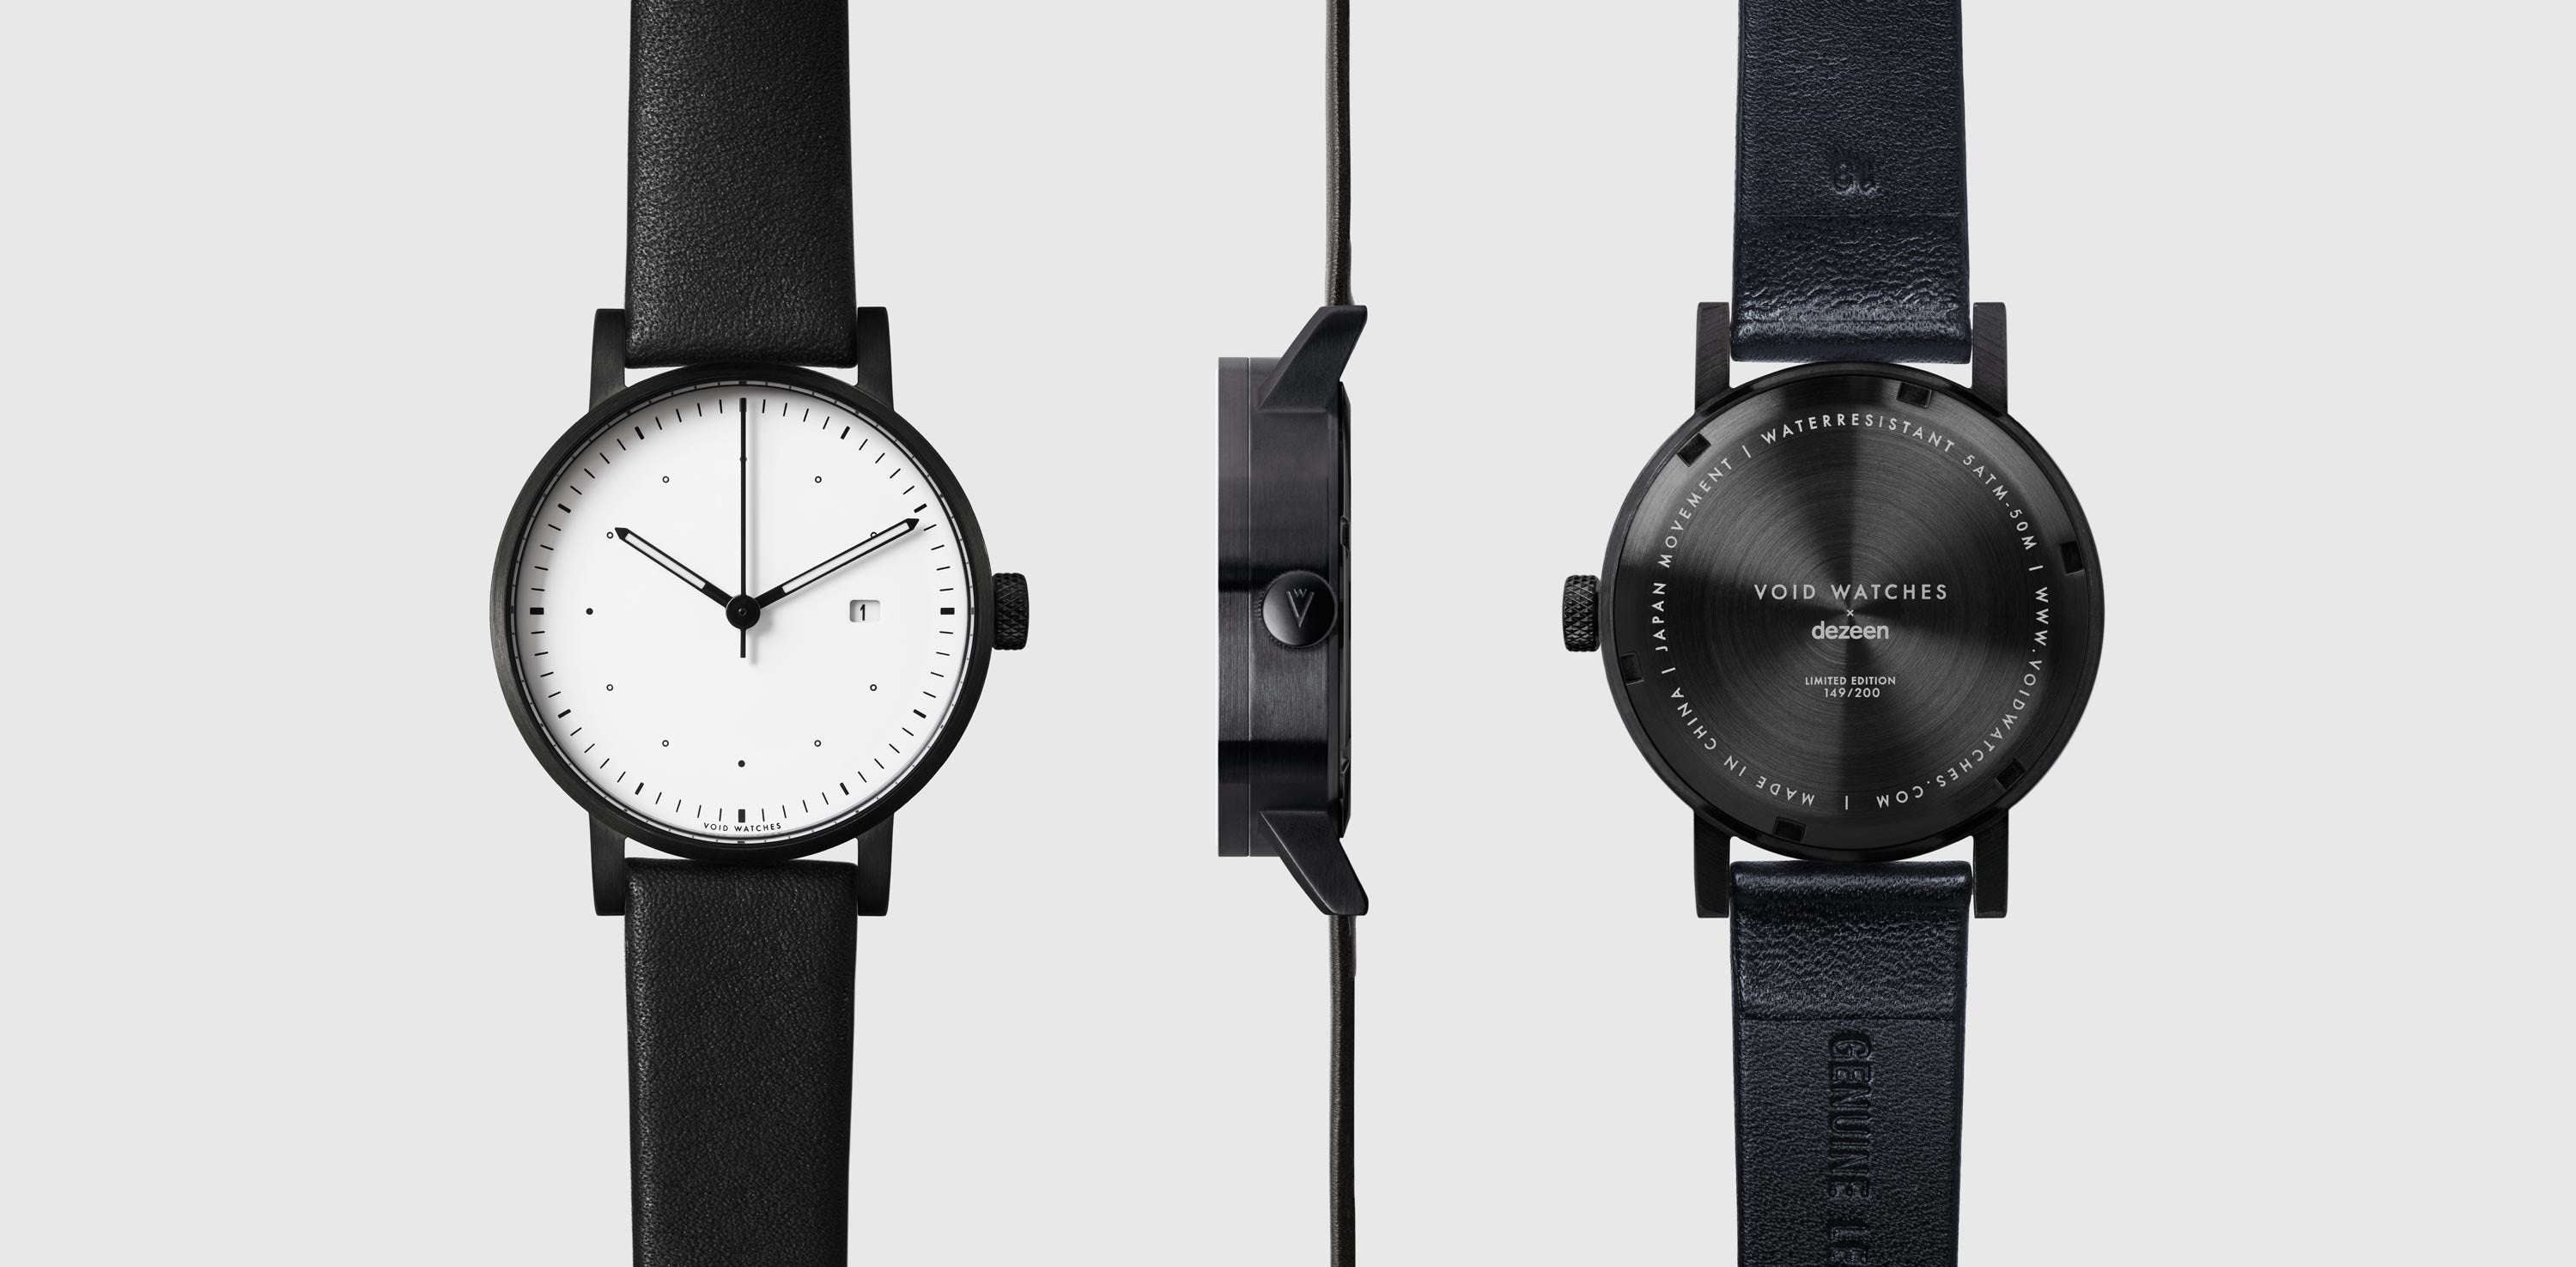 The monochromatic V03D Dezeen watch by David Ericsson and Patrick Kim Gustafson for VOID Watches